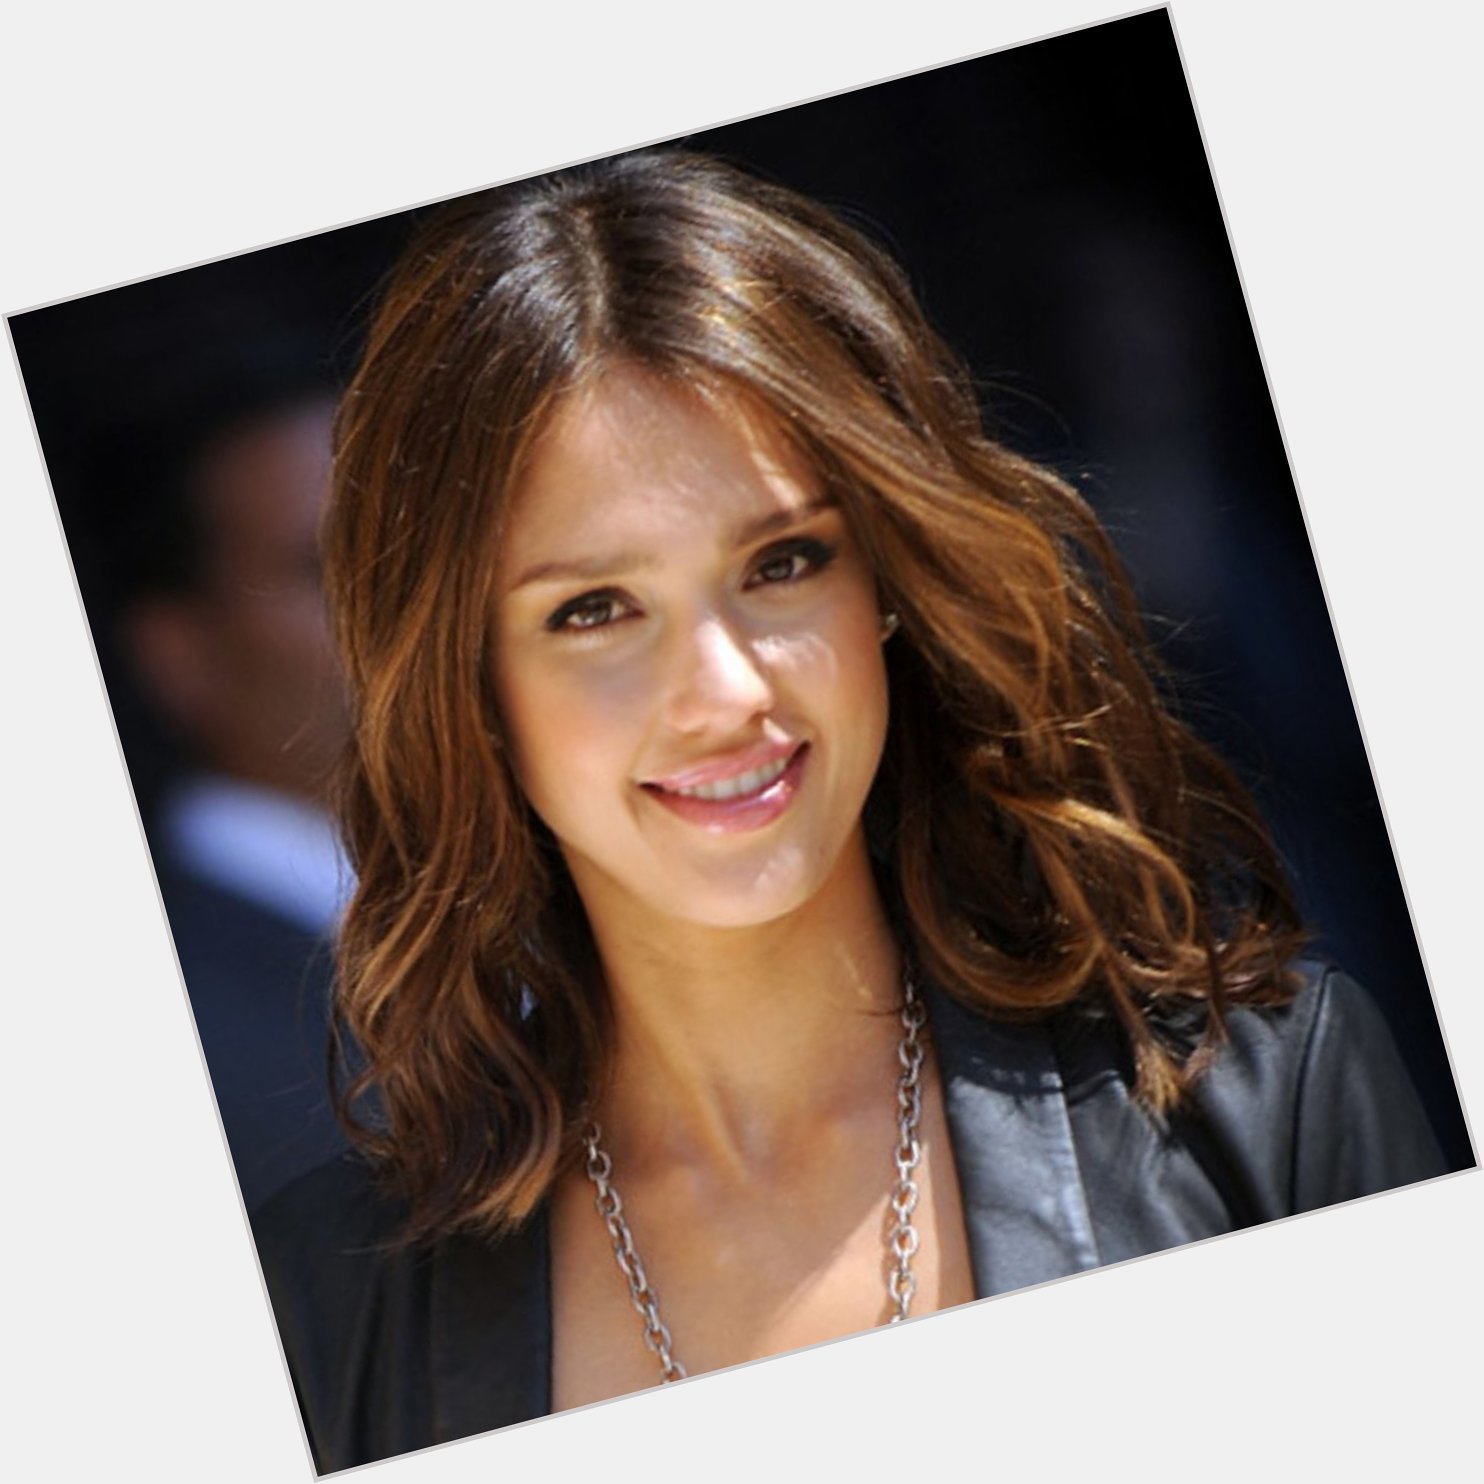 HAPPY BIRTHDAY TO JESSICA ALBA MY FAVORITE ACTRESS SINCE I SAW HER ON THE TV SERIES BLACK ANGEL 